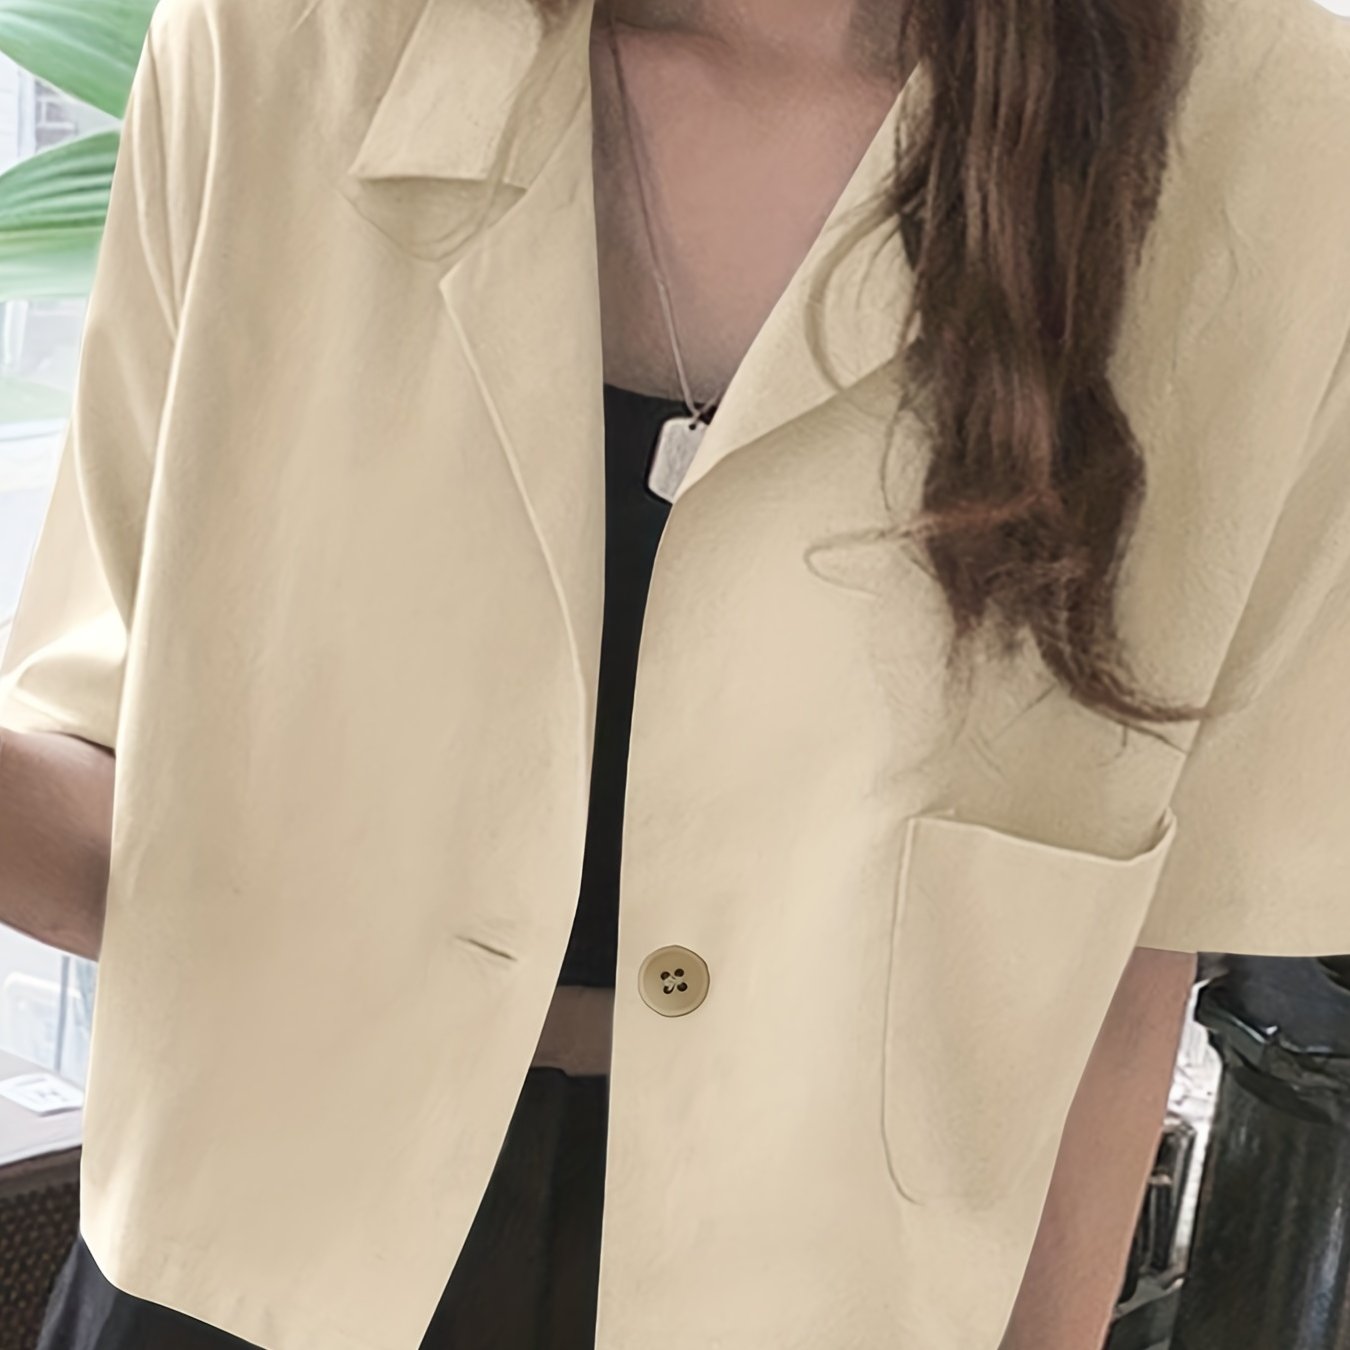 Antmvs Short Sleeve Lapel Collar Blazer, Casual Solid Blazer With Pocket For Spring & Summer, Women's Clothing